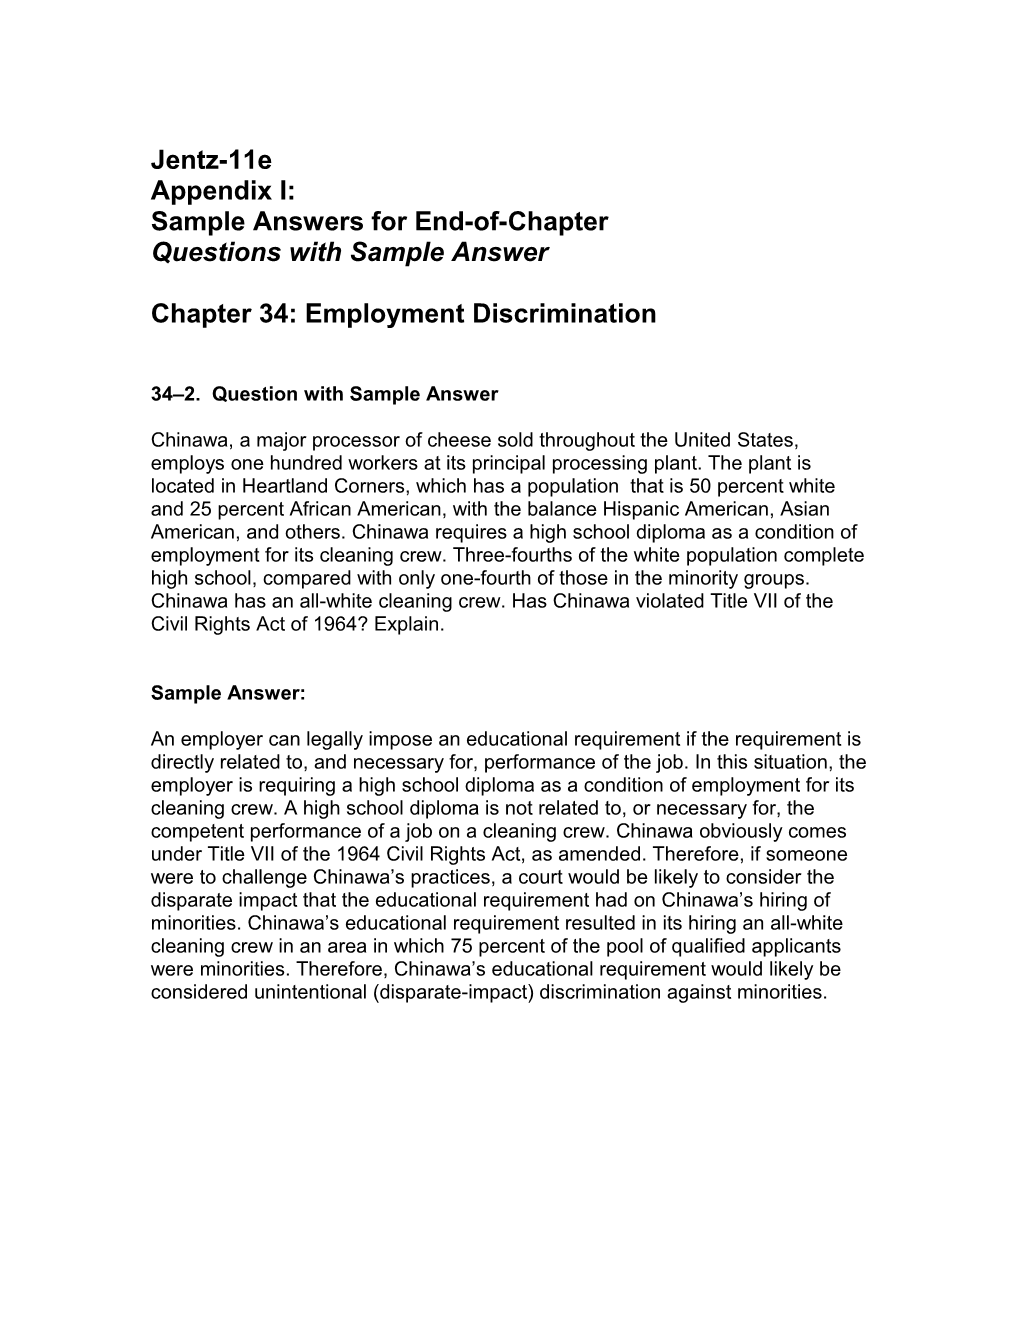 Chapter 4 - Constitutional Authority to Regulate Business s8